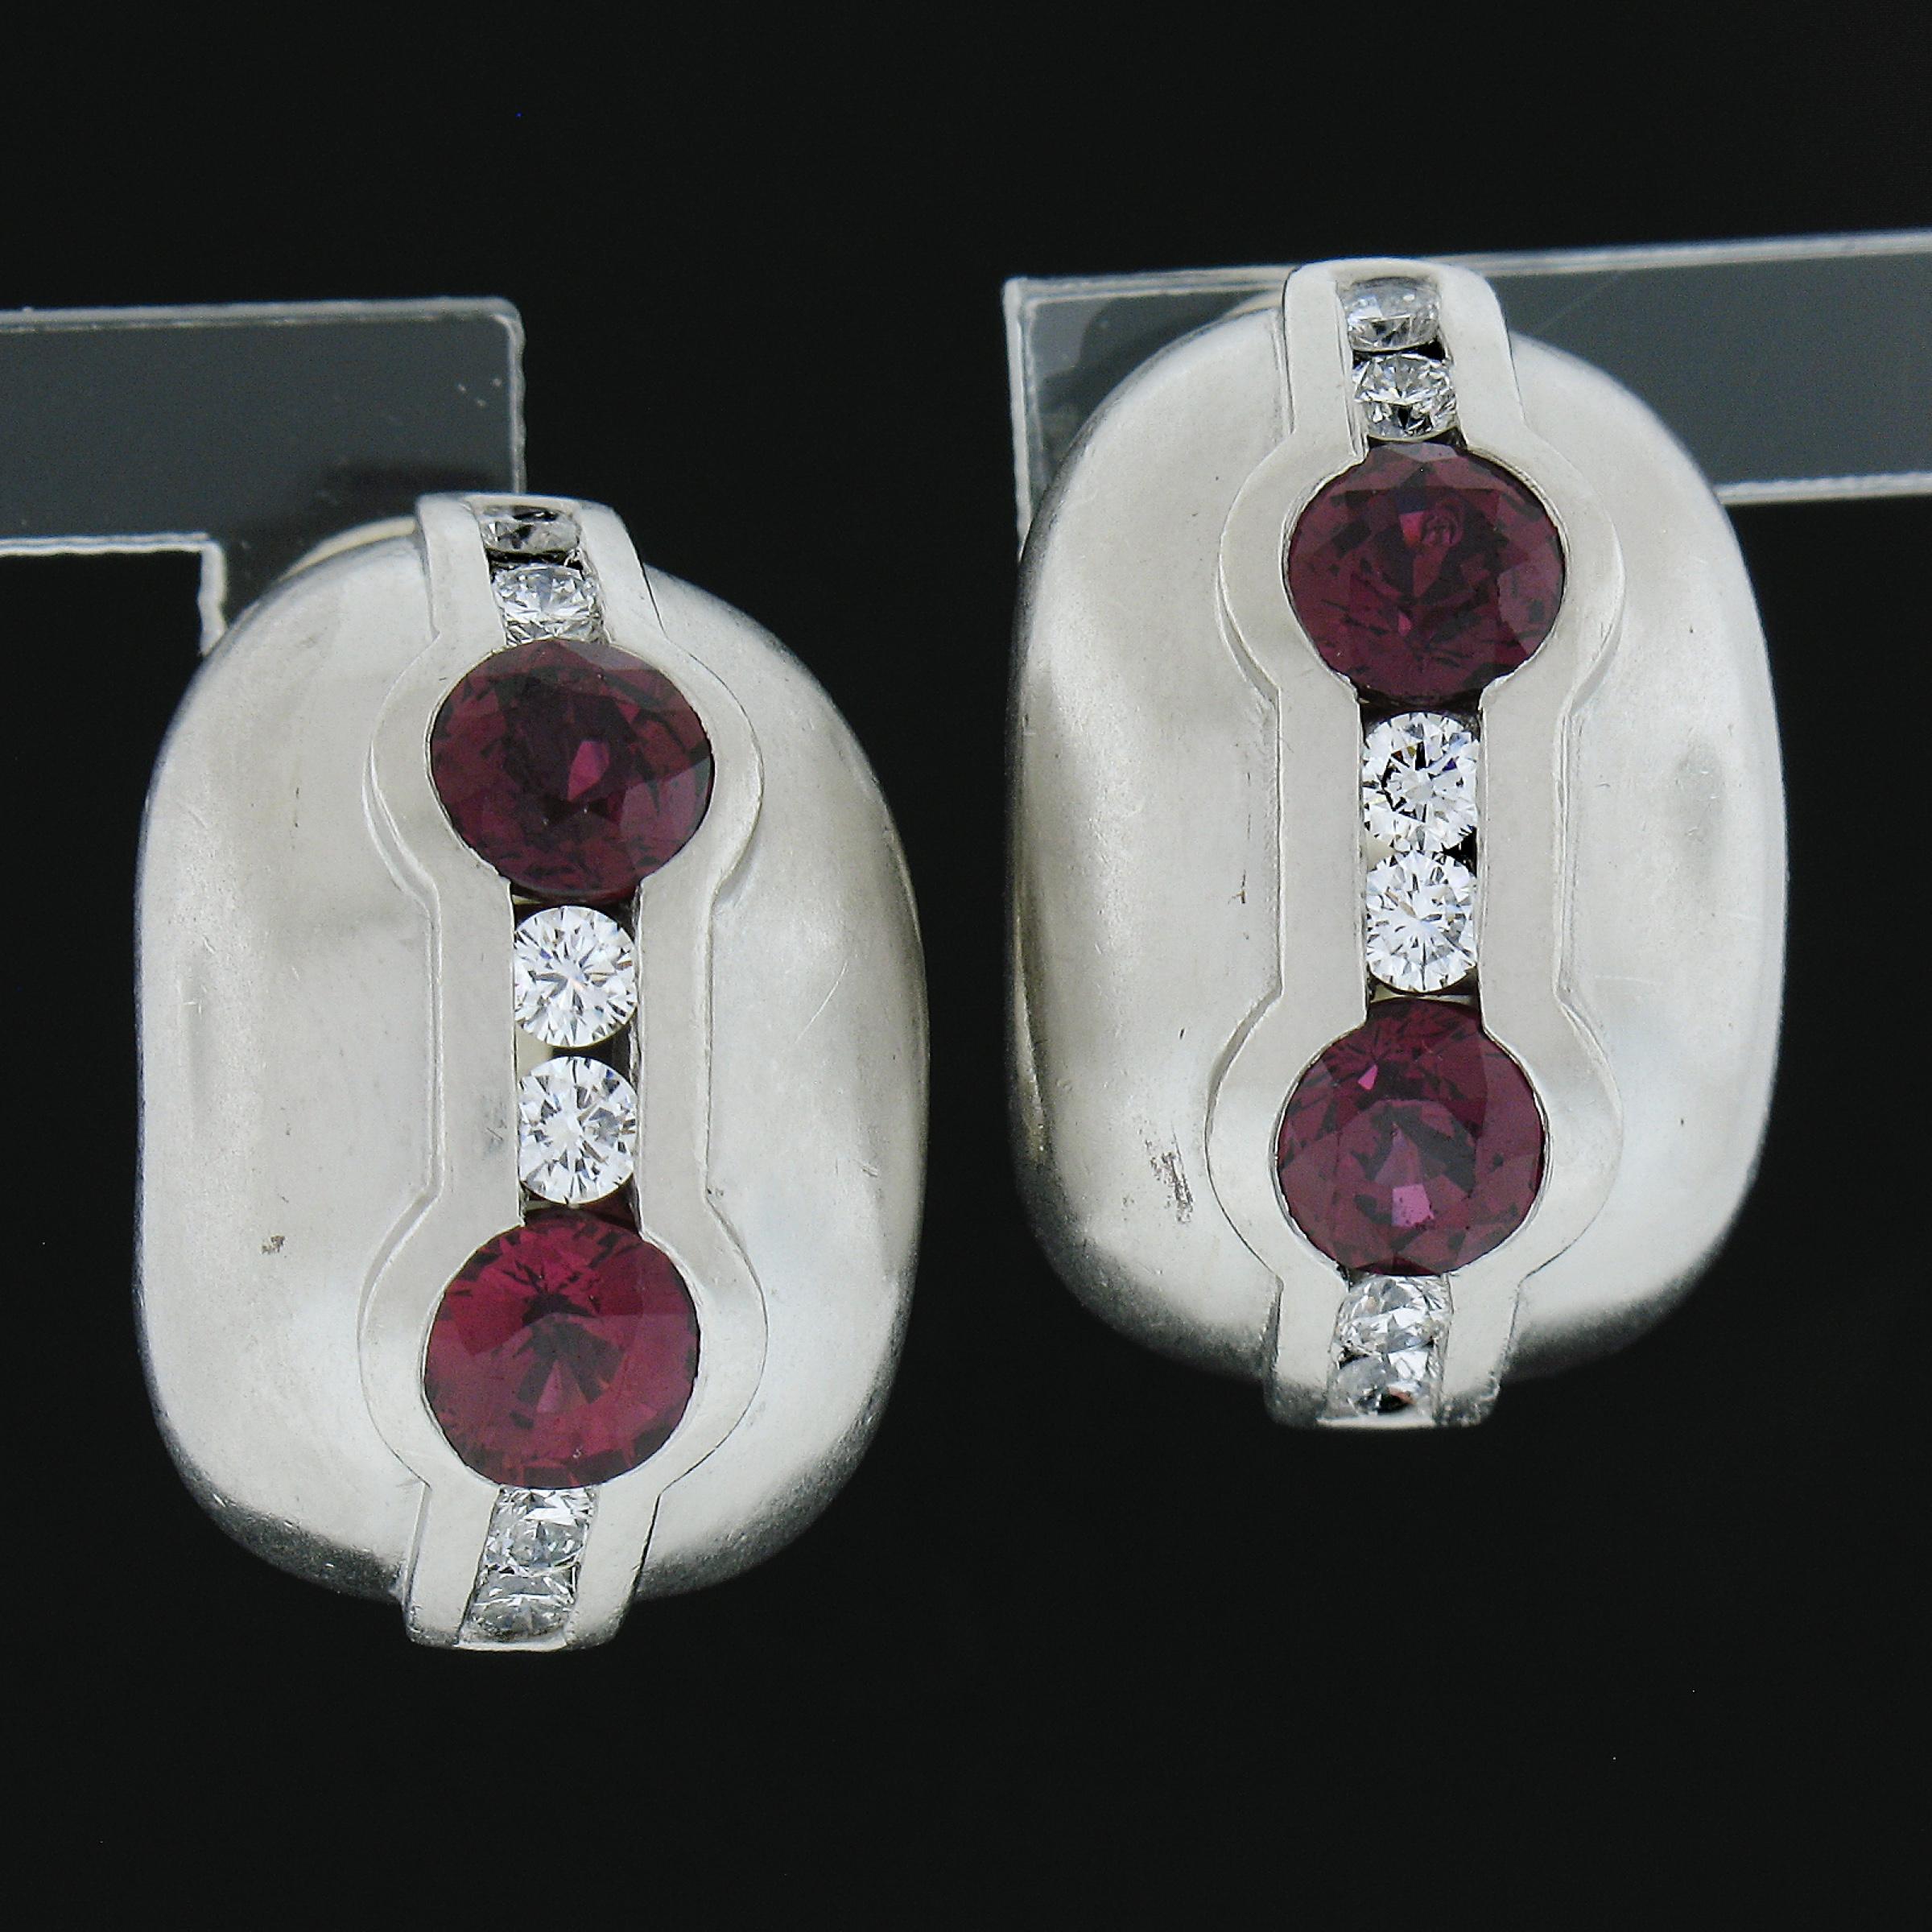 --Stone(s):--
(4) Natural Genuine Rubies - Round Brilliant Cut - Channel Set - Fiery Deep Red Color - 2.60ctw (approx. based on the certification)
** See Certification Details Below for Complete Info on the Rubies **
(12) Natural Genuine Diamonds -